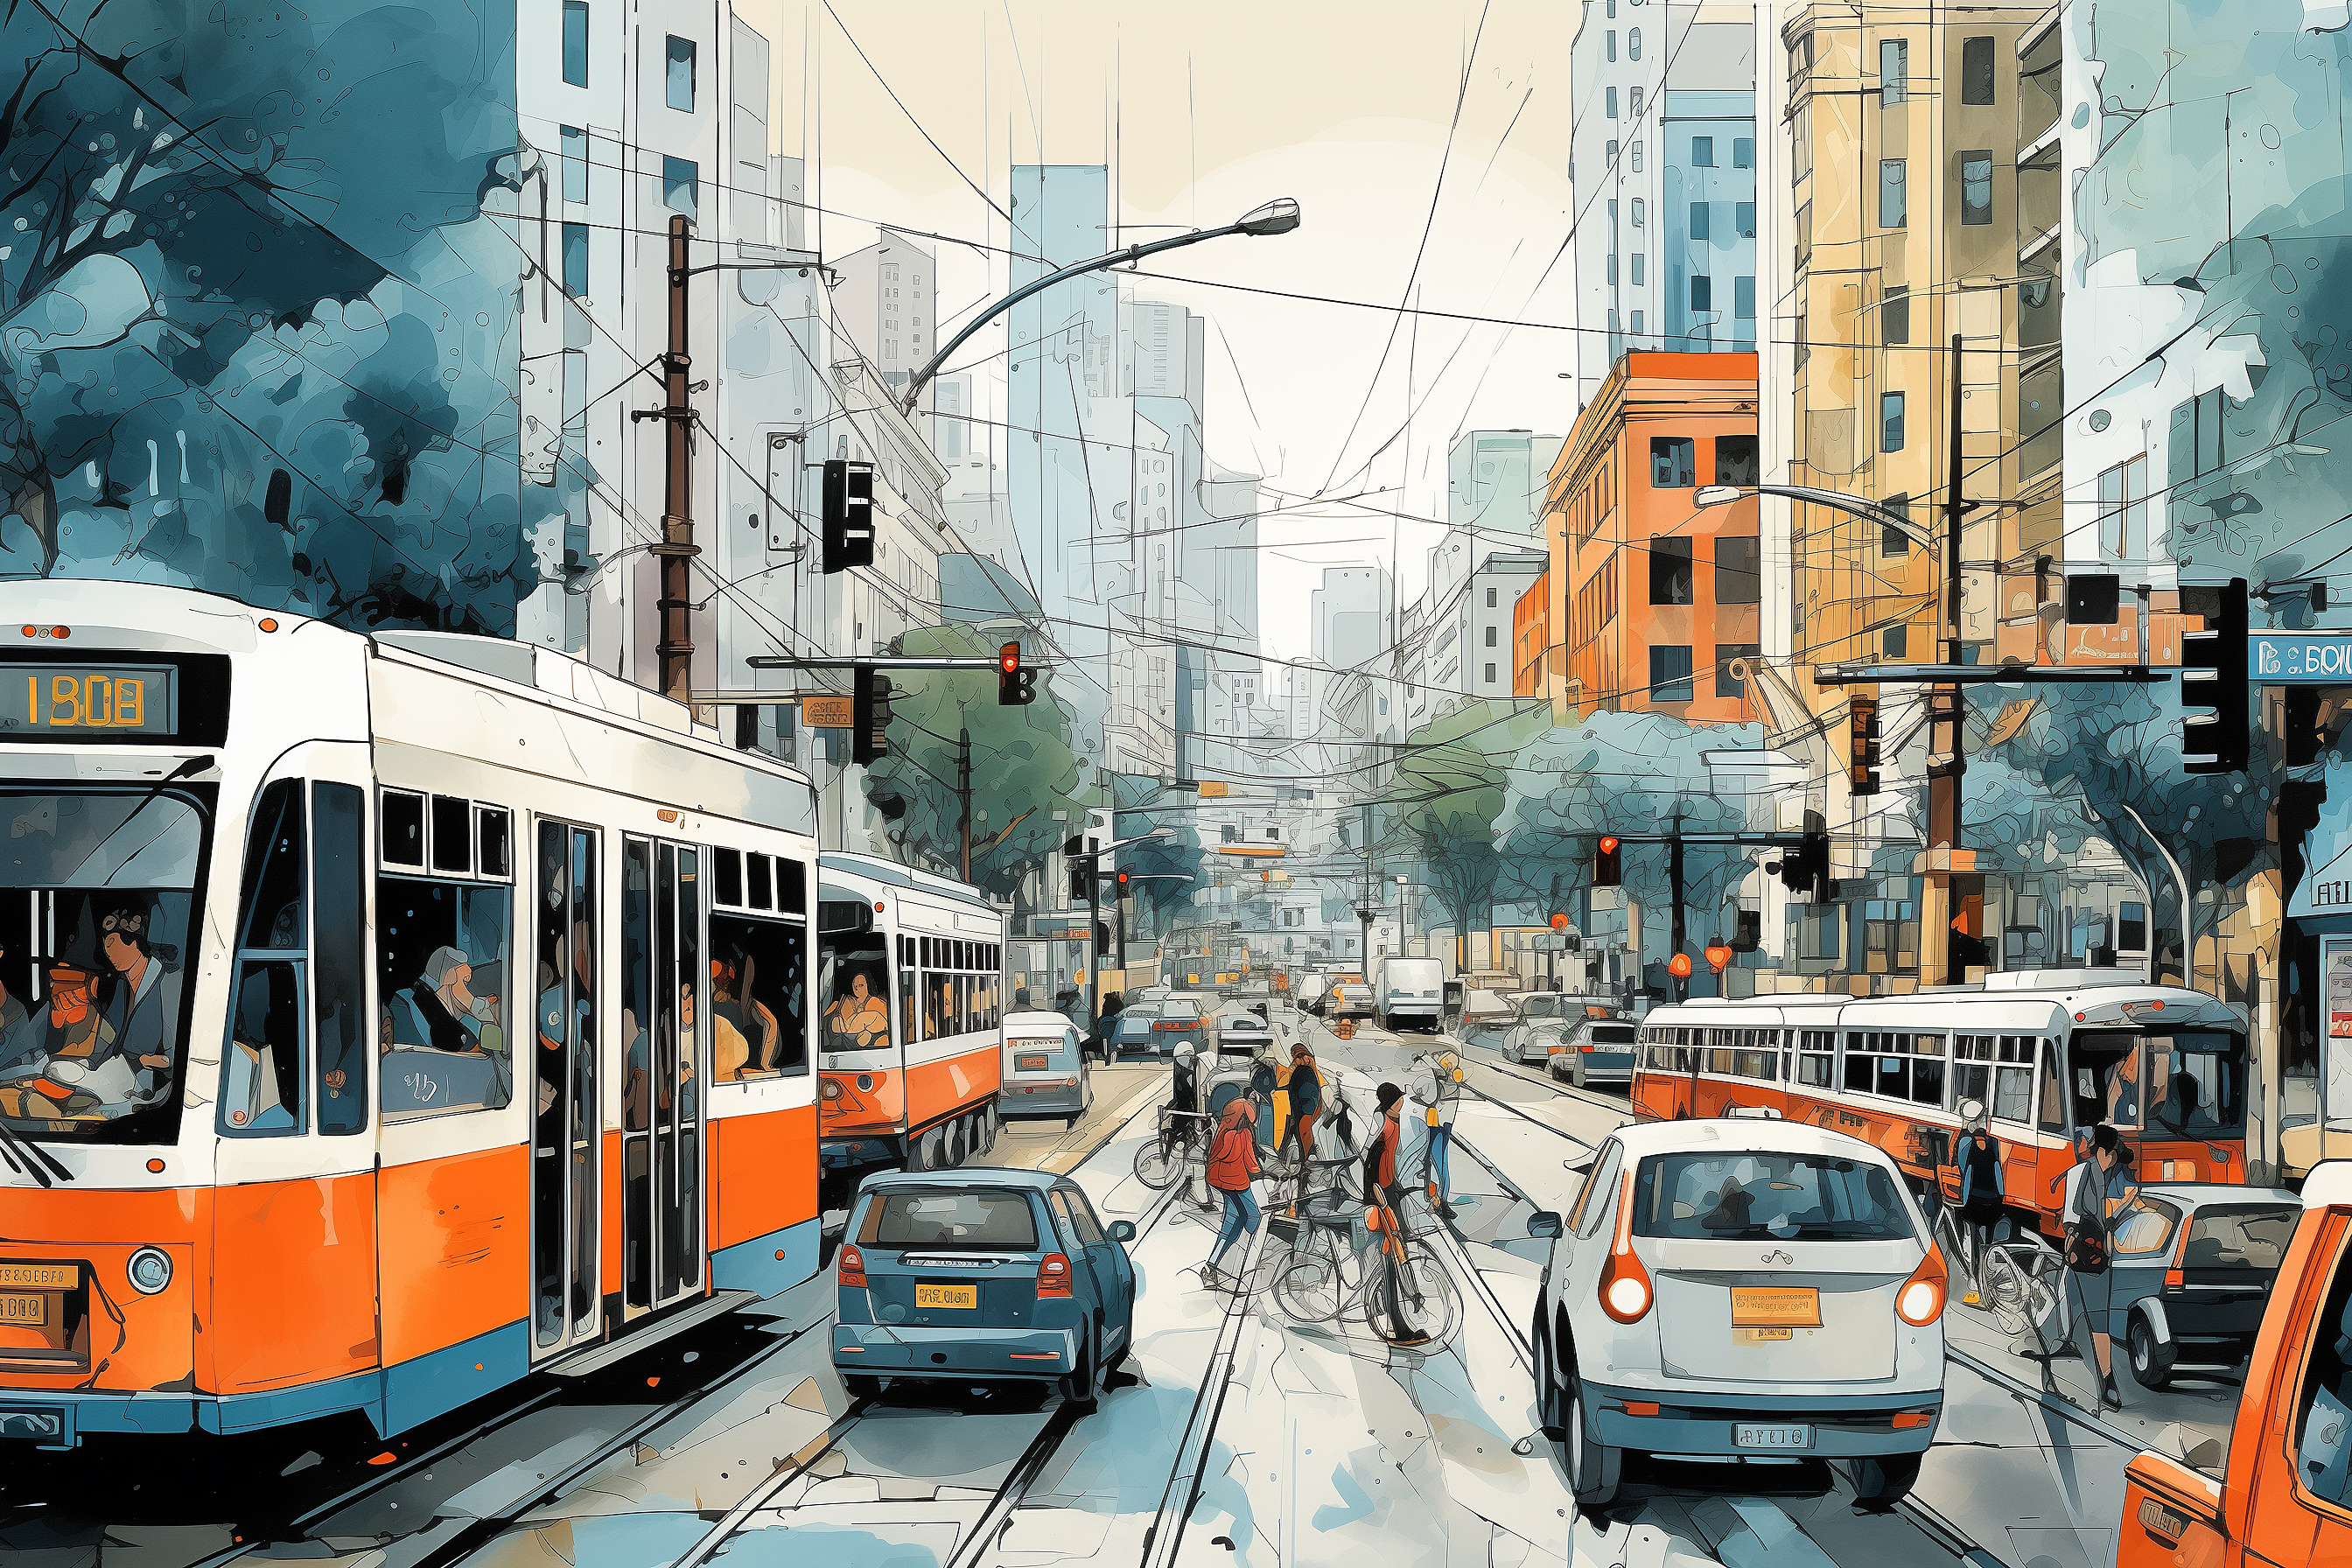 An artistic depiction of a bustling urban street scene with trams, cars, cyclists, and pedestrians under a hazy sky.